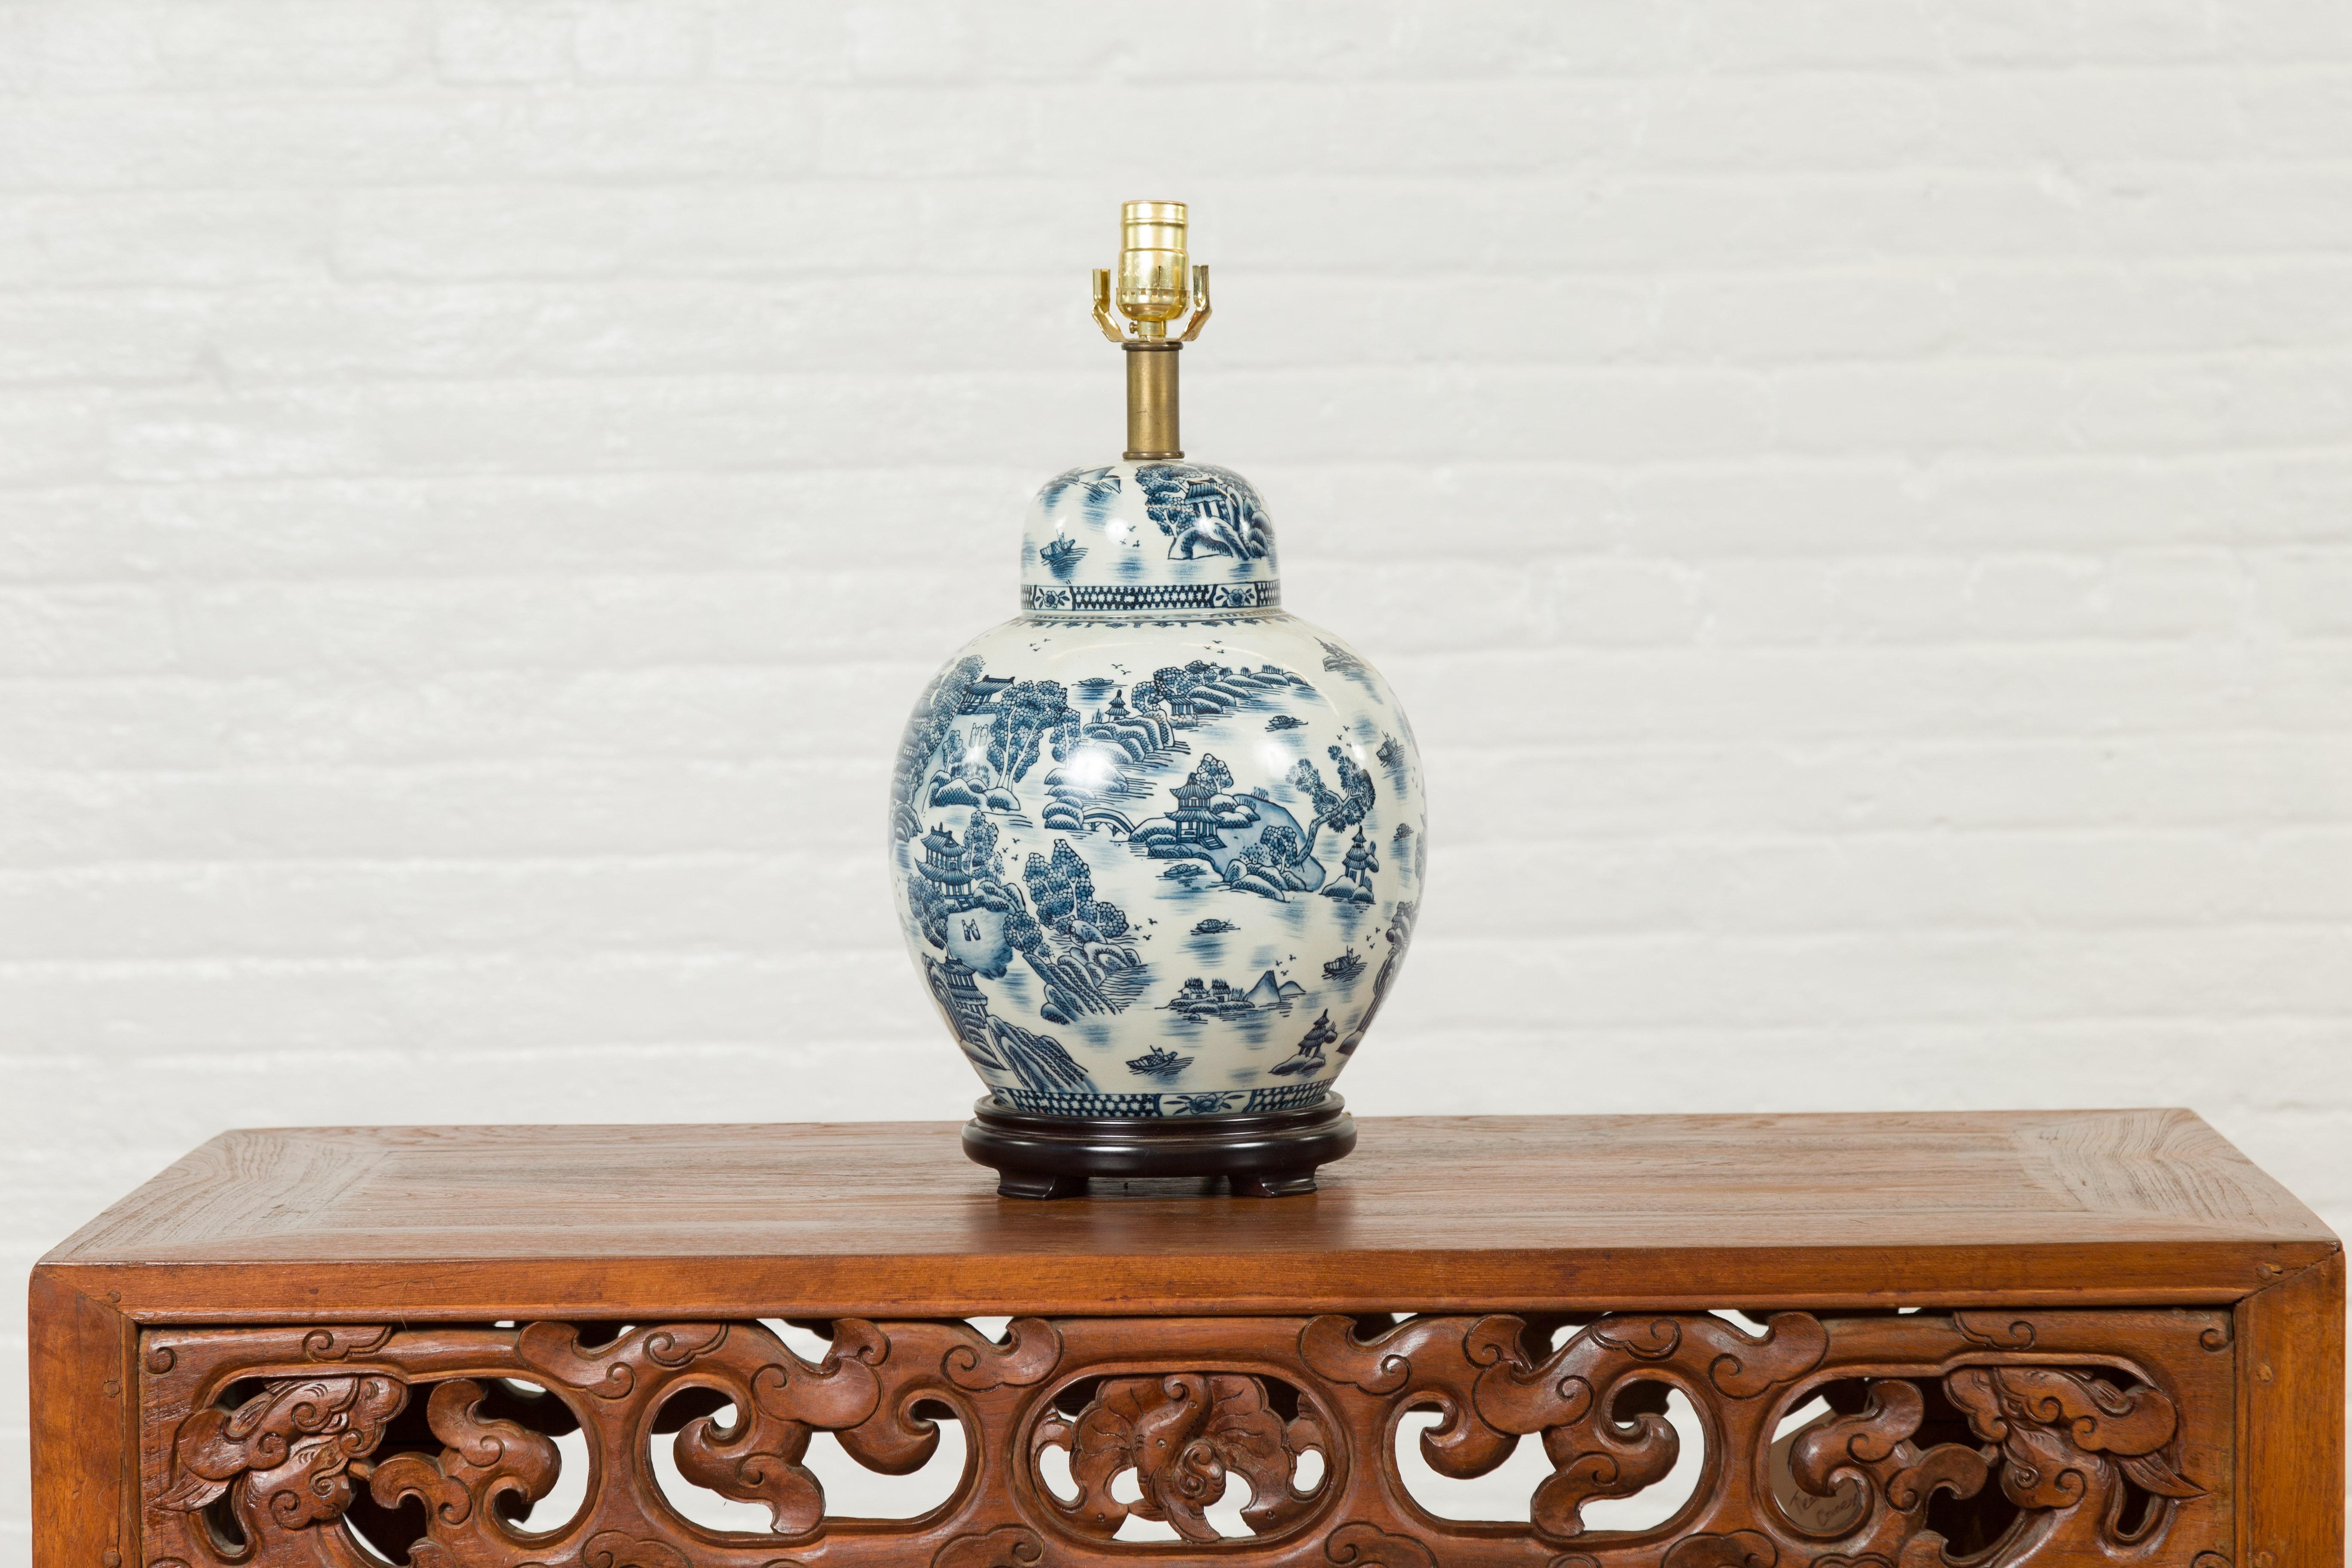 Vintage Chinese Blue and white Porcelain Lamp with Architectures and Landscapes For Sale 2